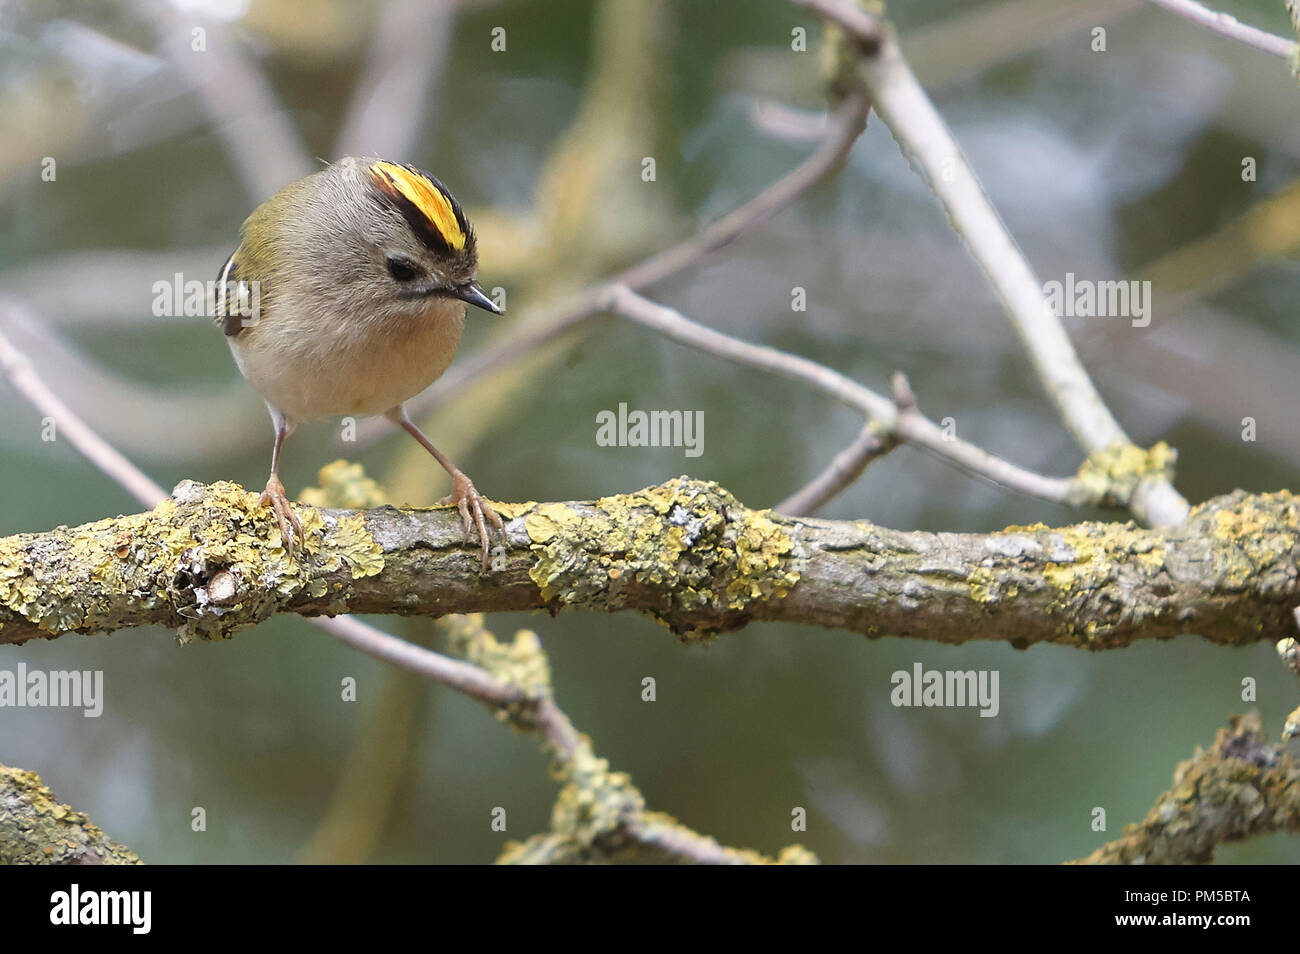 Goldcrest, Regulus regulus, the UK's smallest bird eats tiny morsels like spiders, moth eggs and other small insect food. Stock Photo